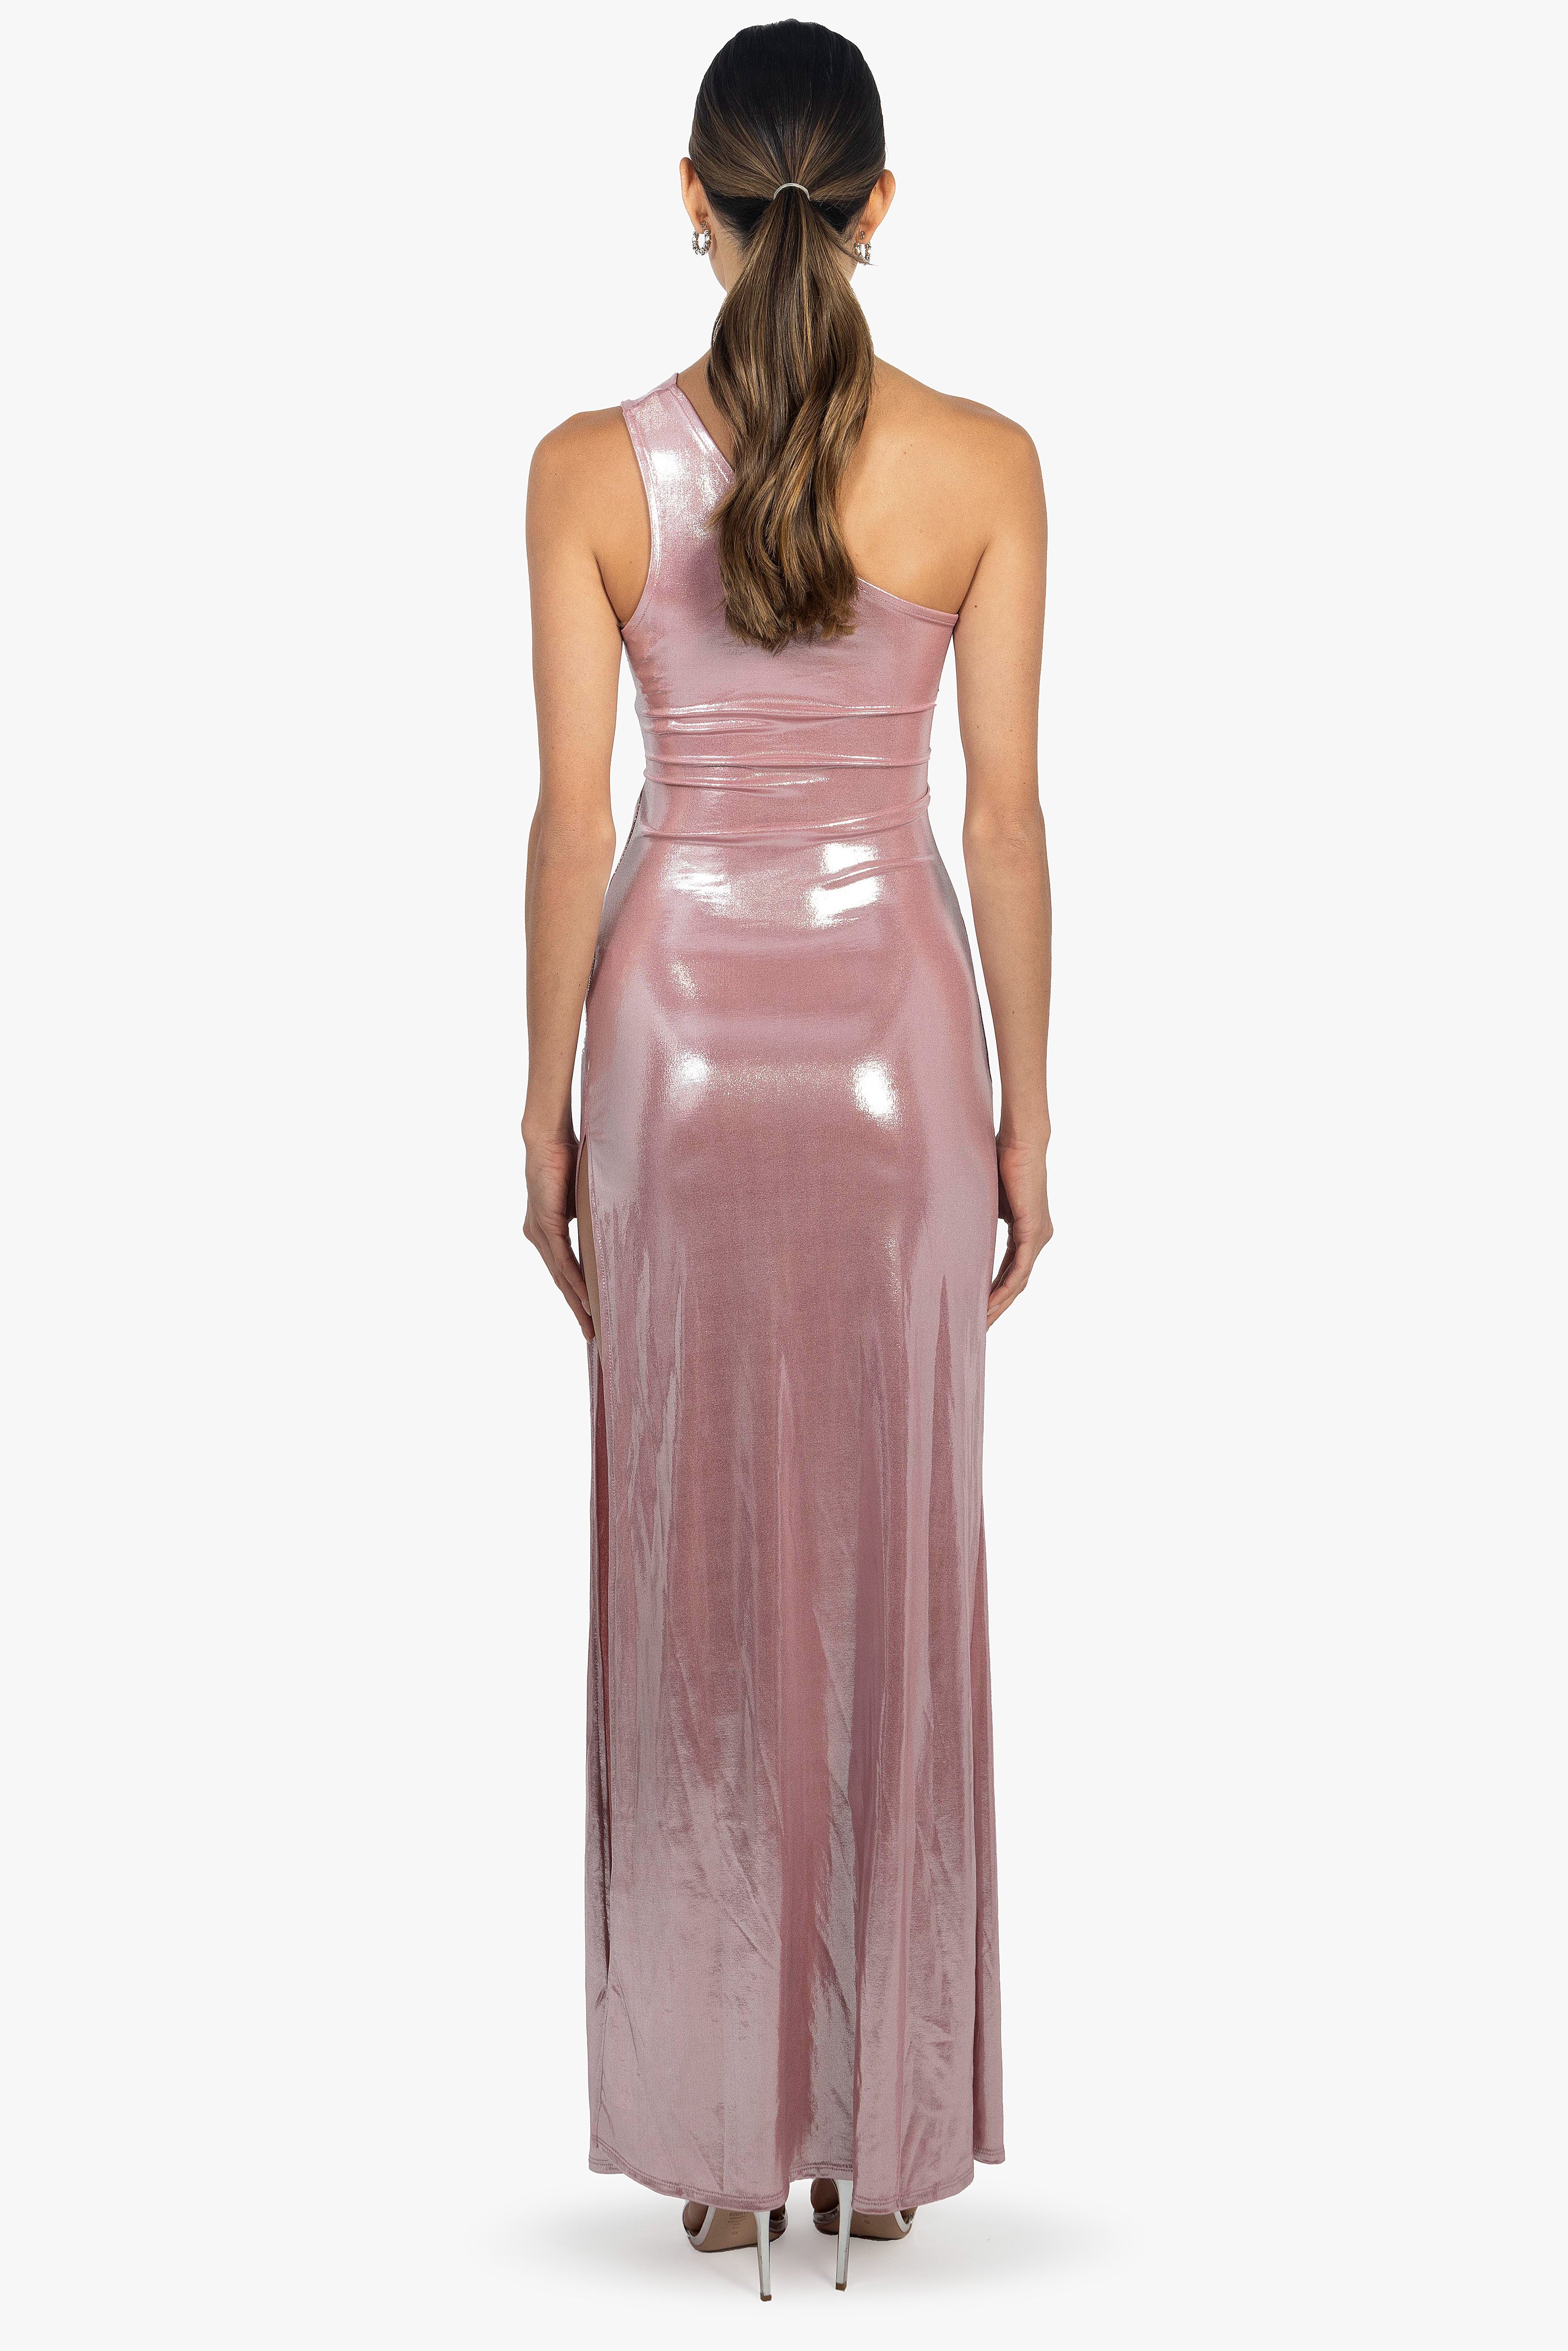 PINK SHIMMERY DRESS